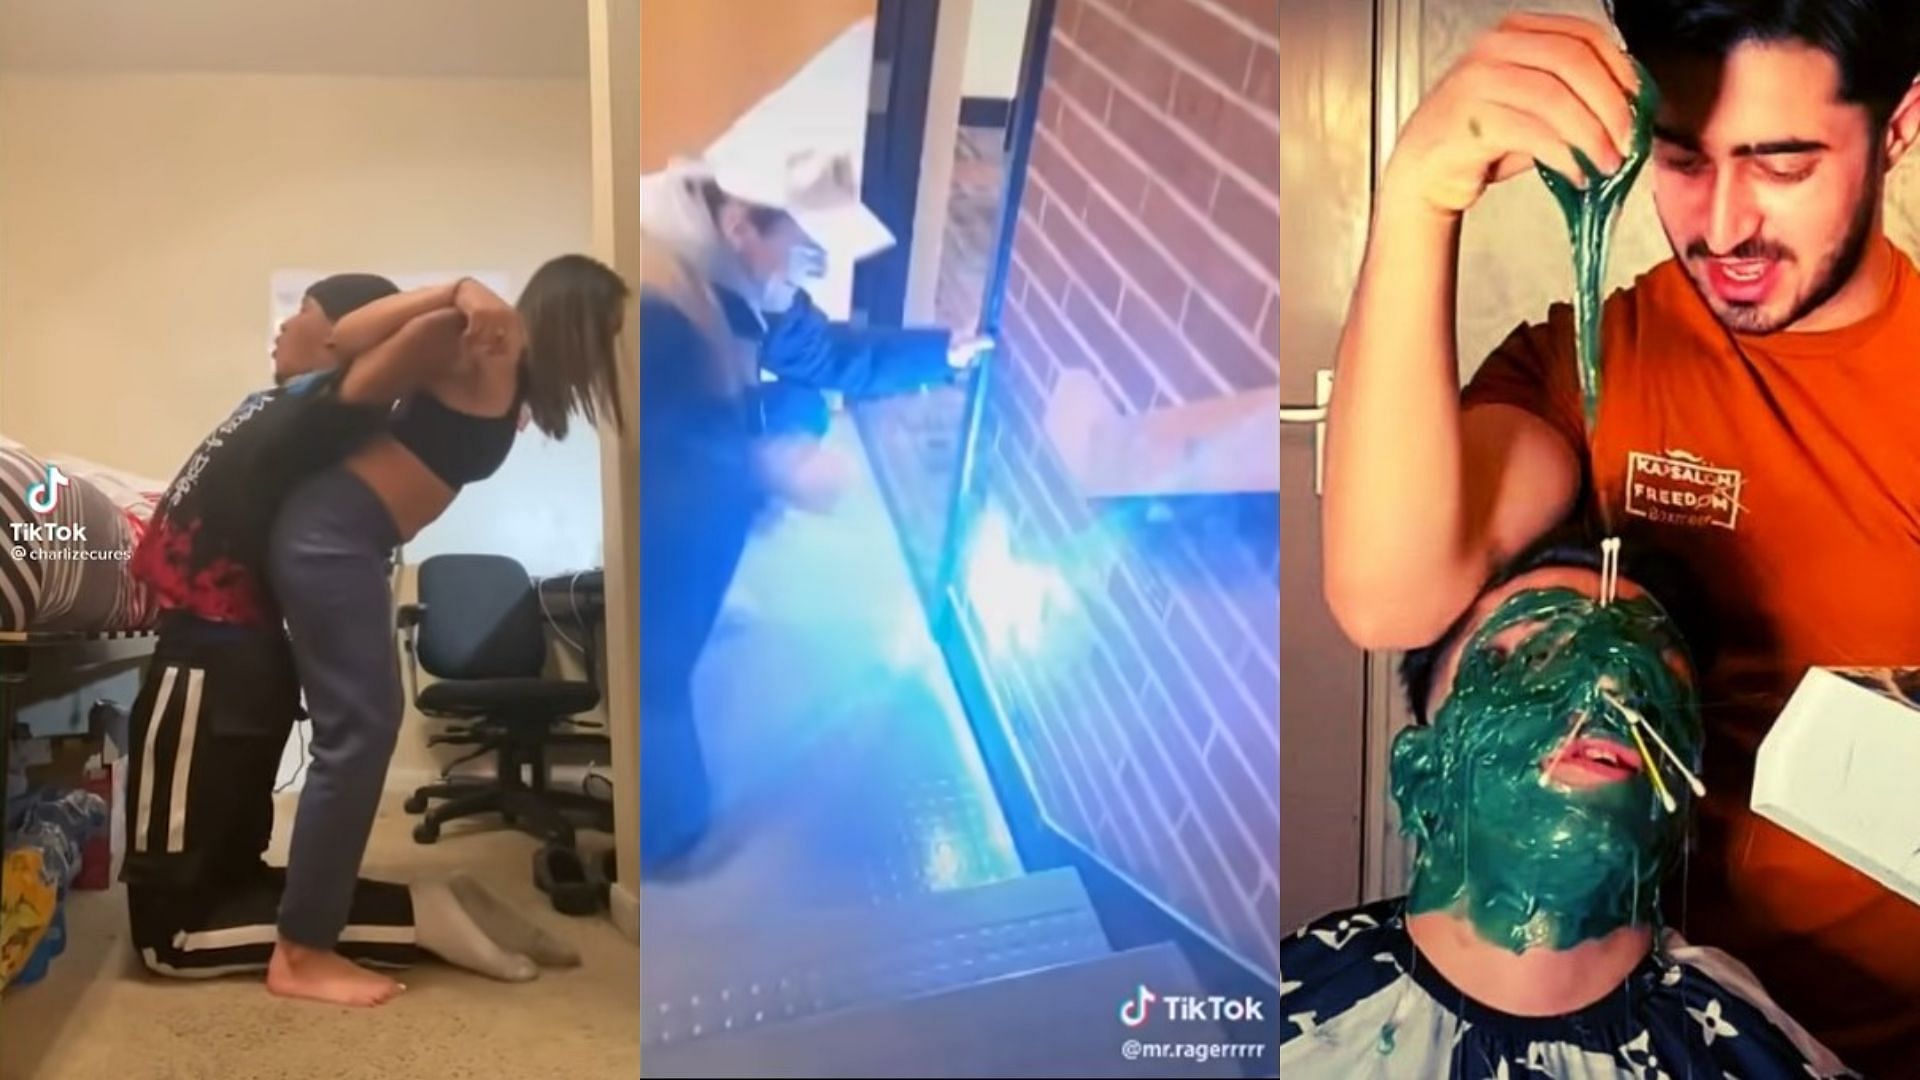 Back Cracking Challenge, Penny Challenge, and Full Face Wax Challenge are among the deadliest TikTok challenges (Images via charlizecures/TikTok, mr.ragerrrrr/TikTok, and YouTube)